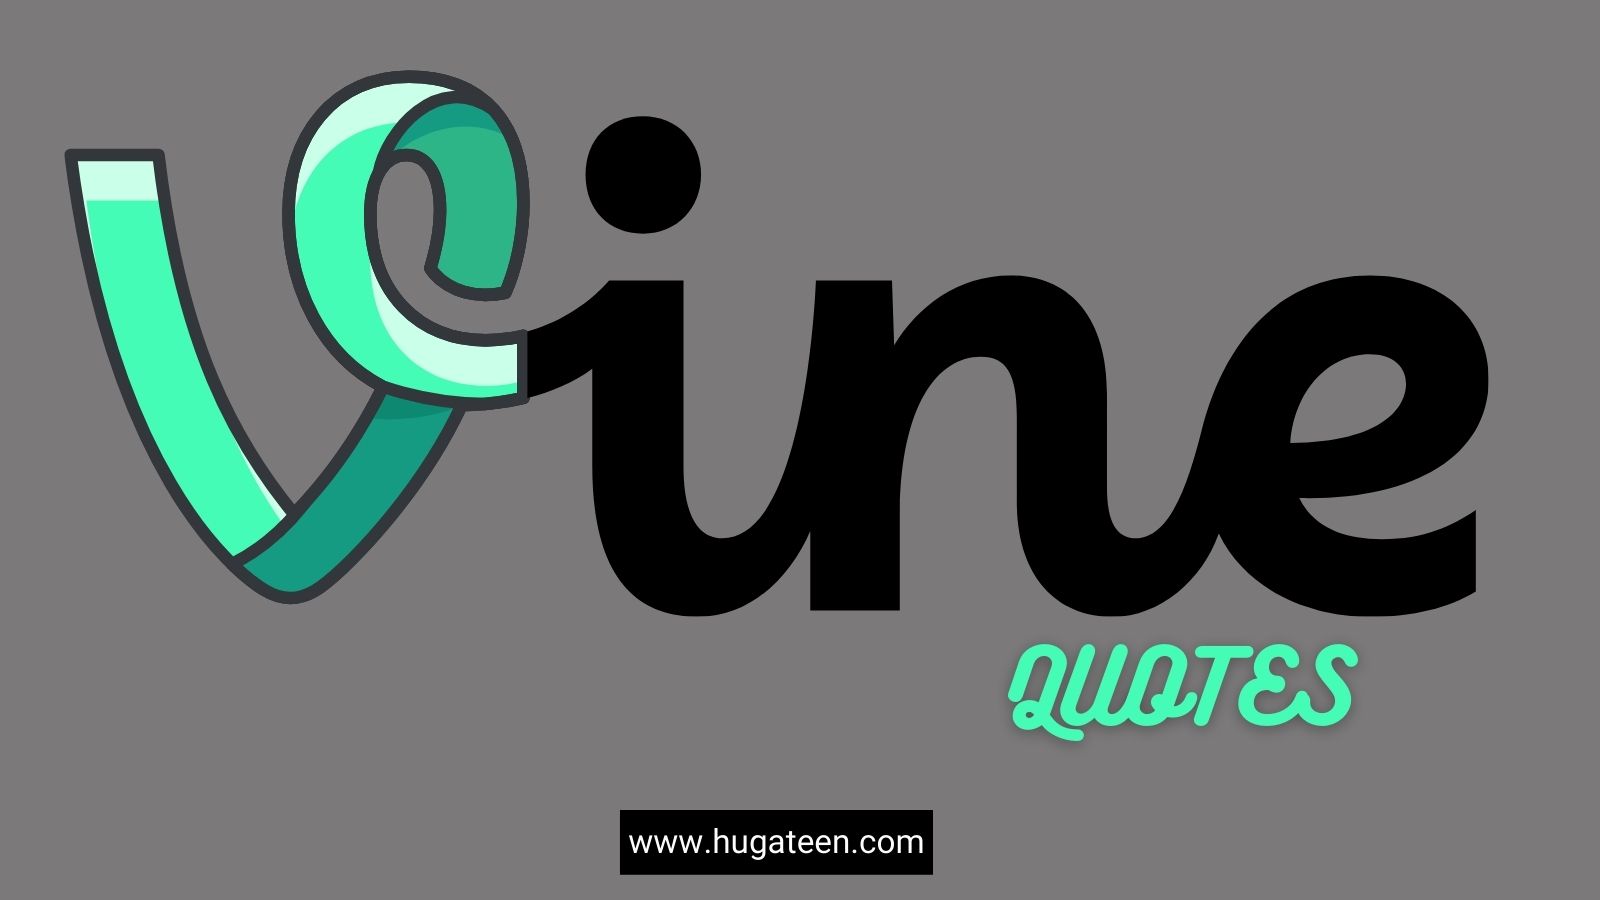 Best Vine Quotes List Ever (Funny, Iconic & Famous!)